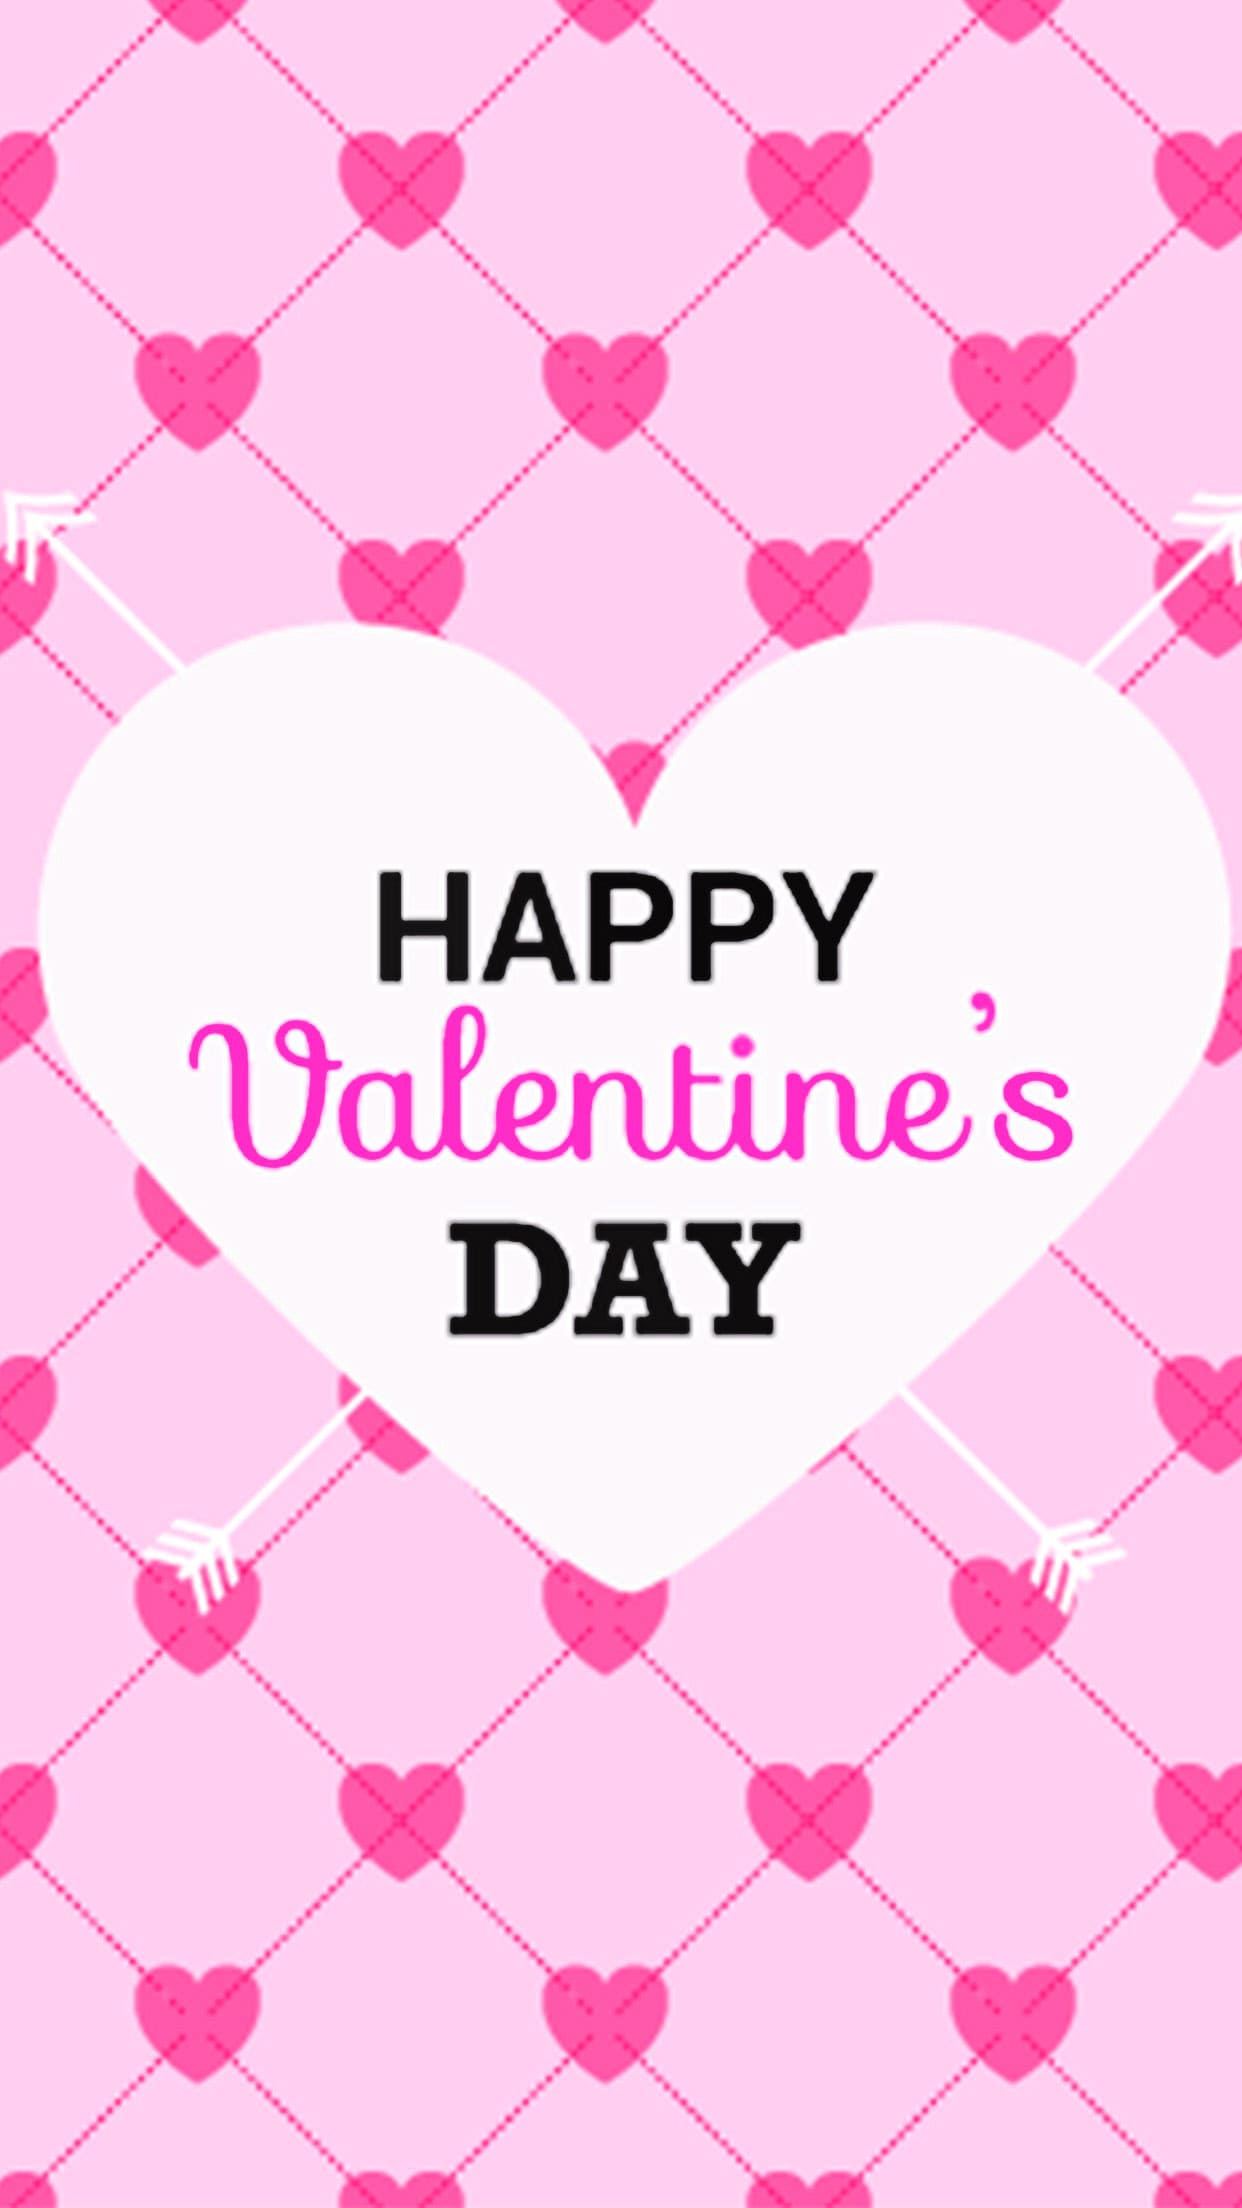 Happy Valentines Day High Quality Top Hd Wallpapers For Mobile Phones :  Wallpapers13.com